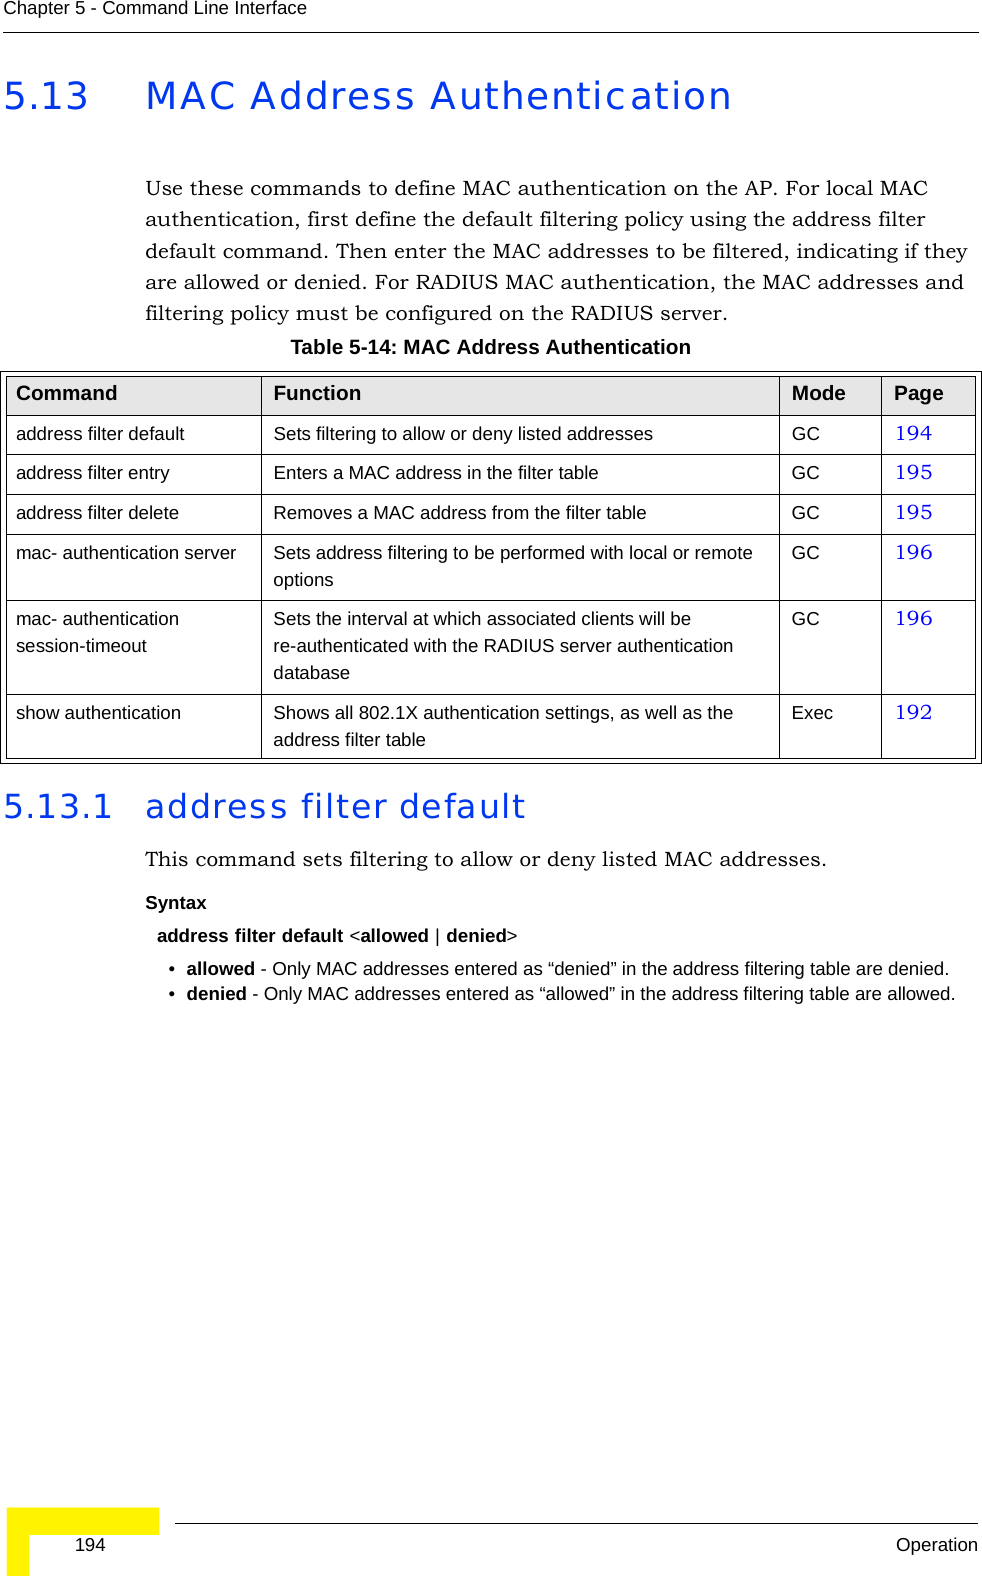  194 OperationChapter 5 - Command Line Interface5.13 MAC Address Authentication Use these commands to define MAC authentication on the AP. For local MAC authentication, first define the default filtering policy using the address filter default command. Then enter the MAC addresses to be filtered, indicating if they are allowed or denied. For RADIUS MAC authentication, the MAC addresses and filtering policy must be configured on the RADIUS server.5.13.1 address filter defaultThis command sets filtering to allow or deny listed MAC addresses.Syntaxaddress filter default &lt;allowed | denied&gt;•allowed - Only MAC addresses entered as “denied” in the address filtering table are denied.•denied - Only MAC addresses entered as “allowed” in the address filtering table are allowed.Table 5-14: MAC Address AuthenticationCommand Function Mode Pageaddress filter default Sets filtering to allow or deny listed addresses GC 194address filter entry Enters a MAC address in the filter table GC 195address filter delete Removes a MAC address from the filter table GC 195mac- authentication server Sets address filtering to be performed with local or remote optionsGC 196mac- authentication session-timeoutSets the interval at which associated clients will be re-authenticated with the RADIUS server authentication databaseGC 196show authentication Shows all 802.1X authentication settings, as well as the address filter tableExec 192